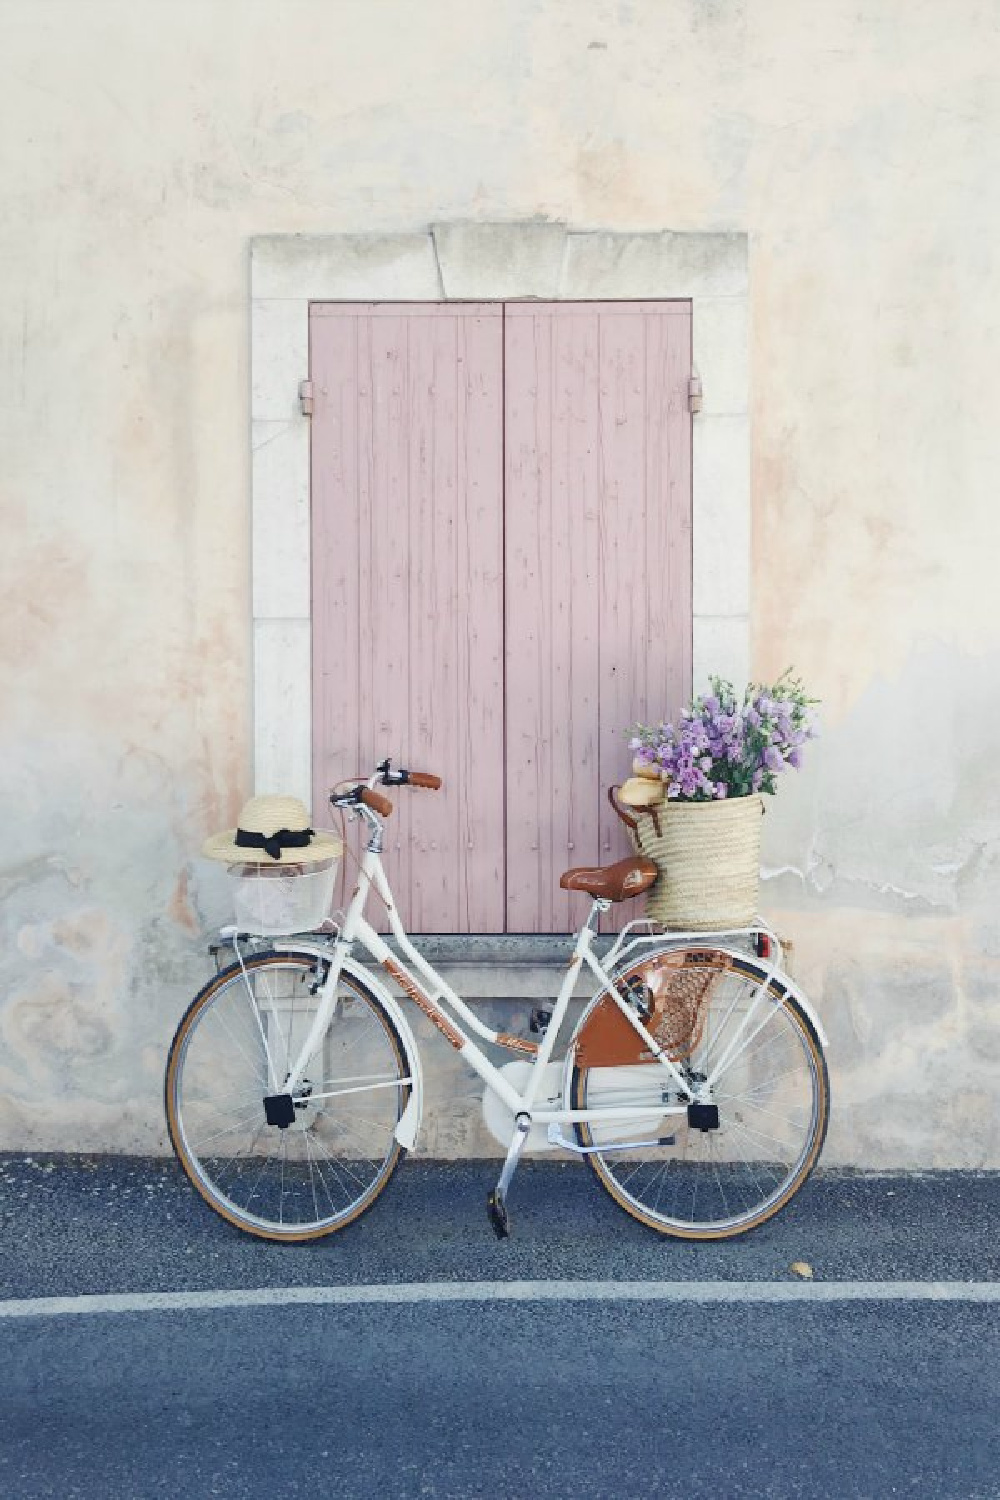 Charming bicycle with French market basket (Vivi et Margot) of flowers and pink shutters on window. Vivi et Margot. Come be inspired by more French farmhouse design inspiration on Hello Lovely. #vivietmargot #bicycle #pink #frenchfarmhouse #frenchbasket #marketbasket #romanticdecor